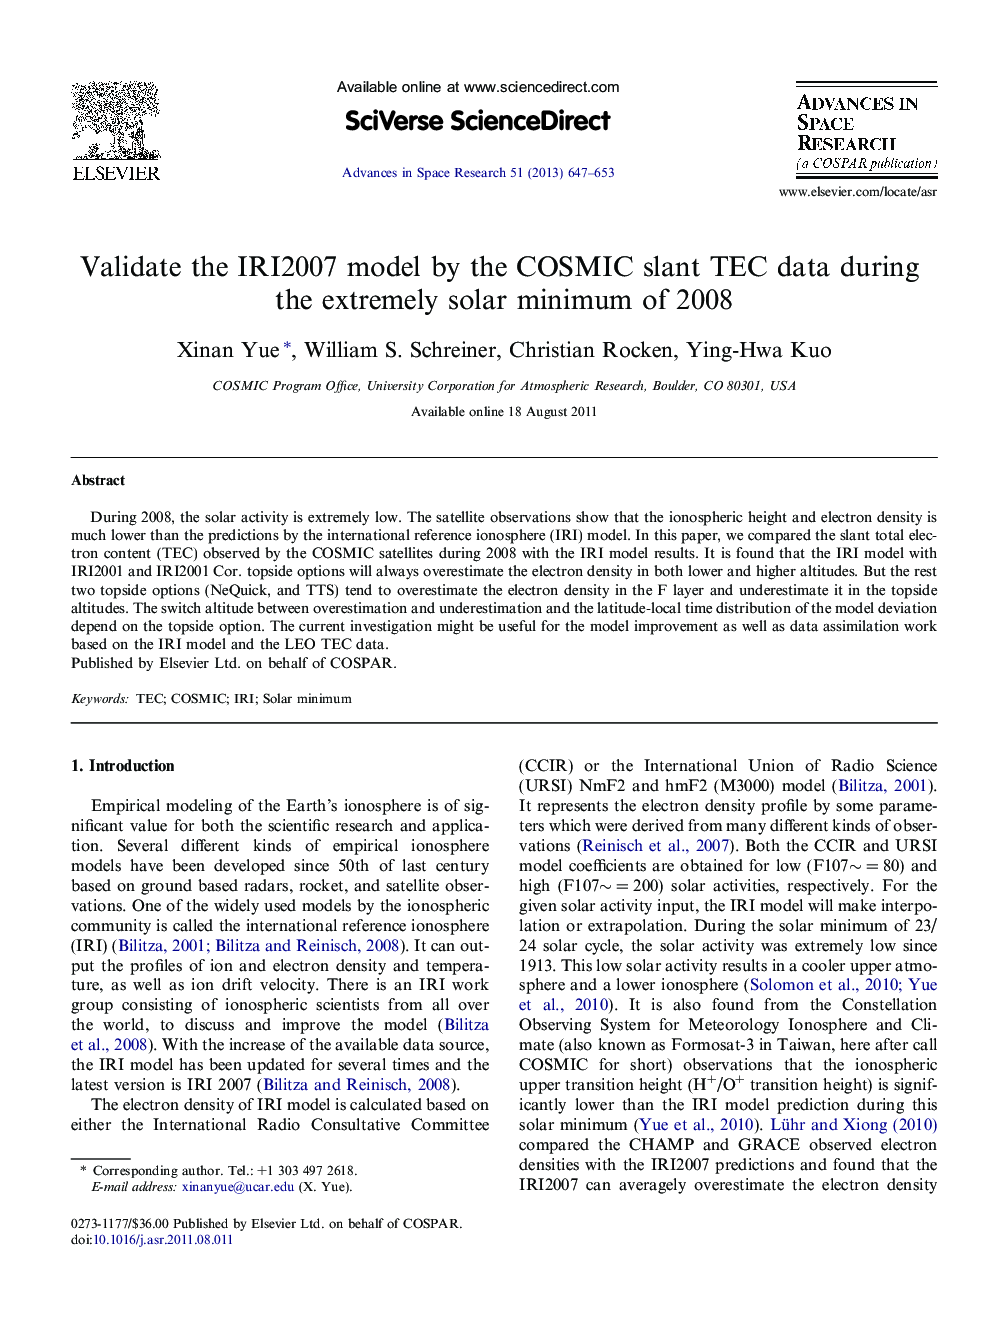 Validate the IRI2007 model by the COSMIC slant TEC data during the extremely solar minimum of 2008